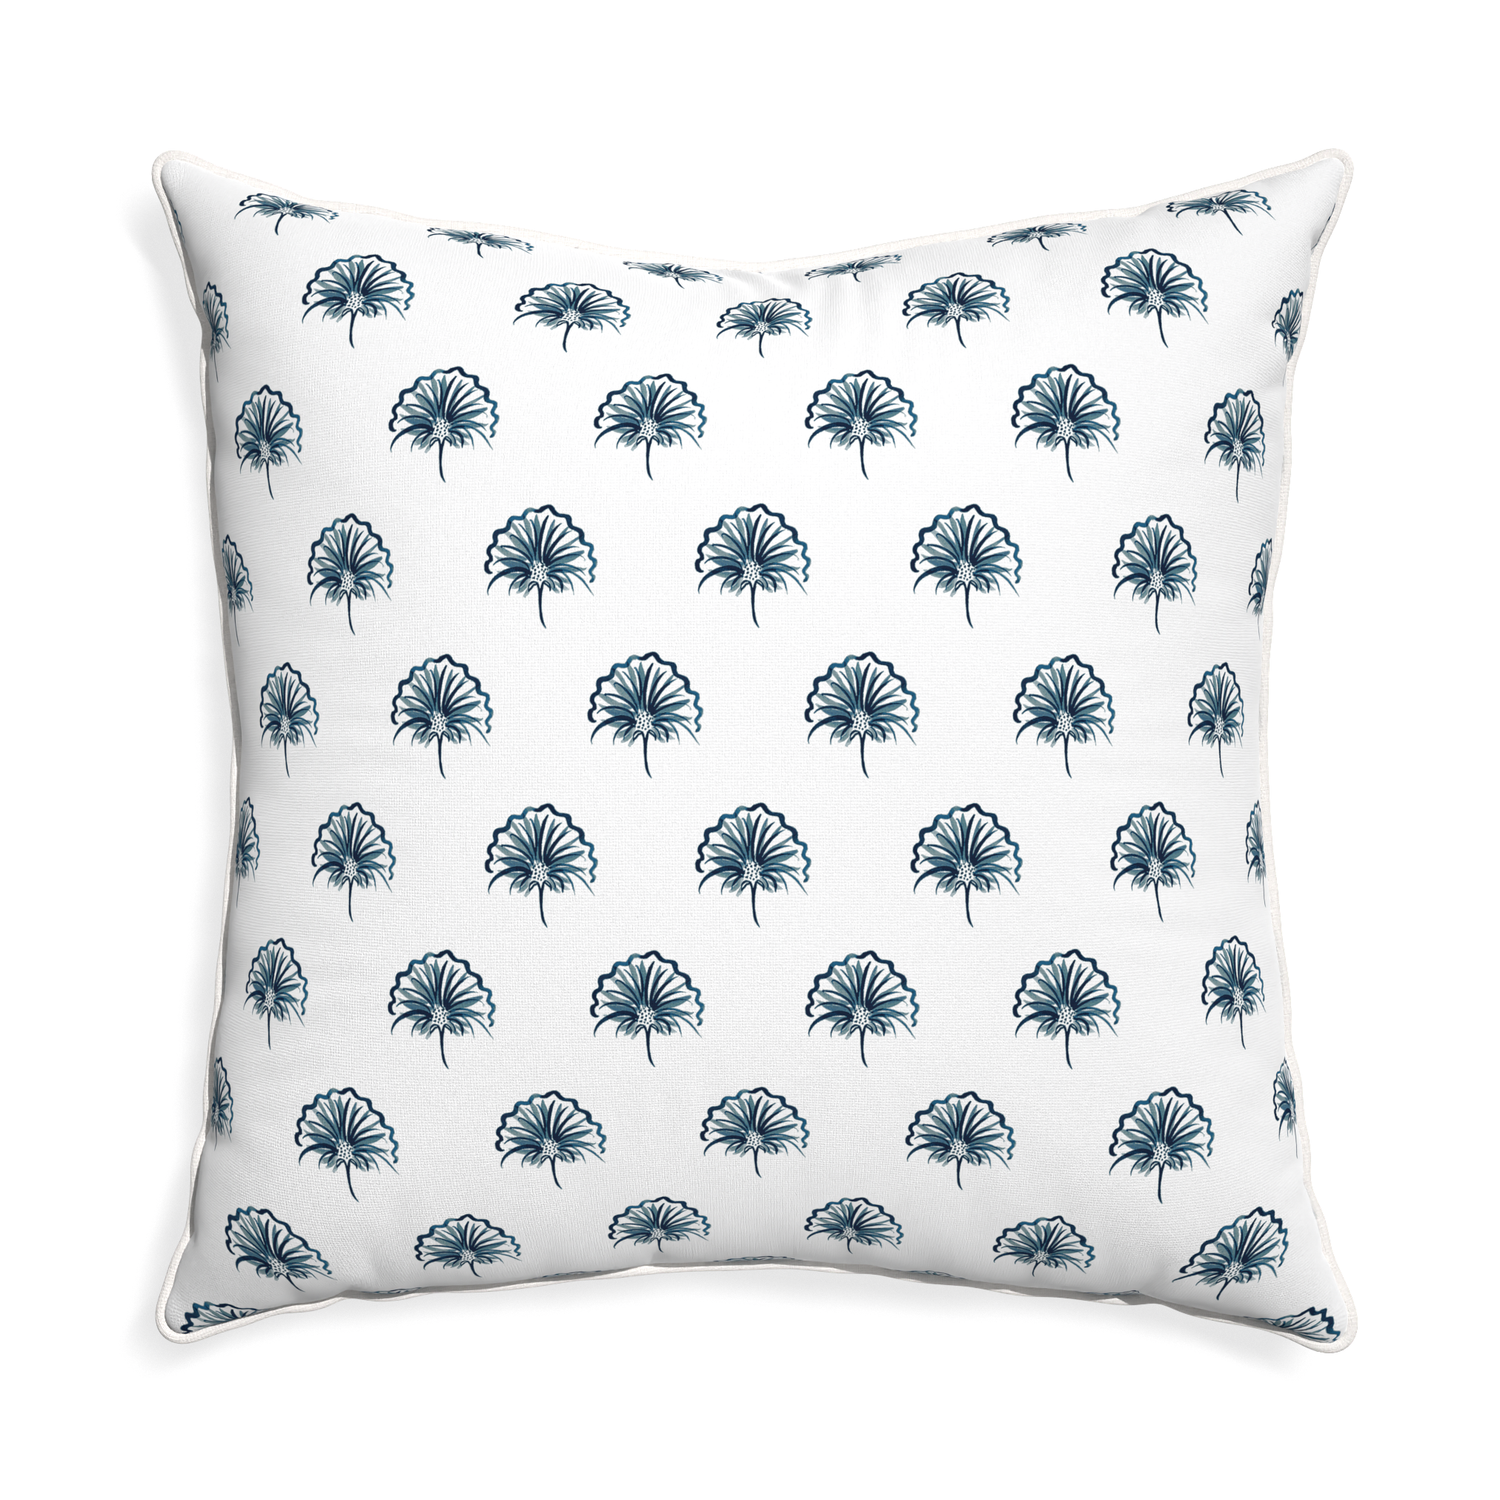 Euro-sham penelope midnight custom pillow with snow piping on white background